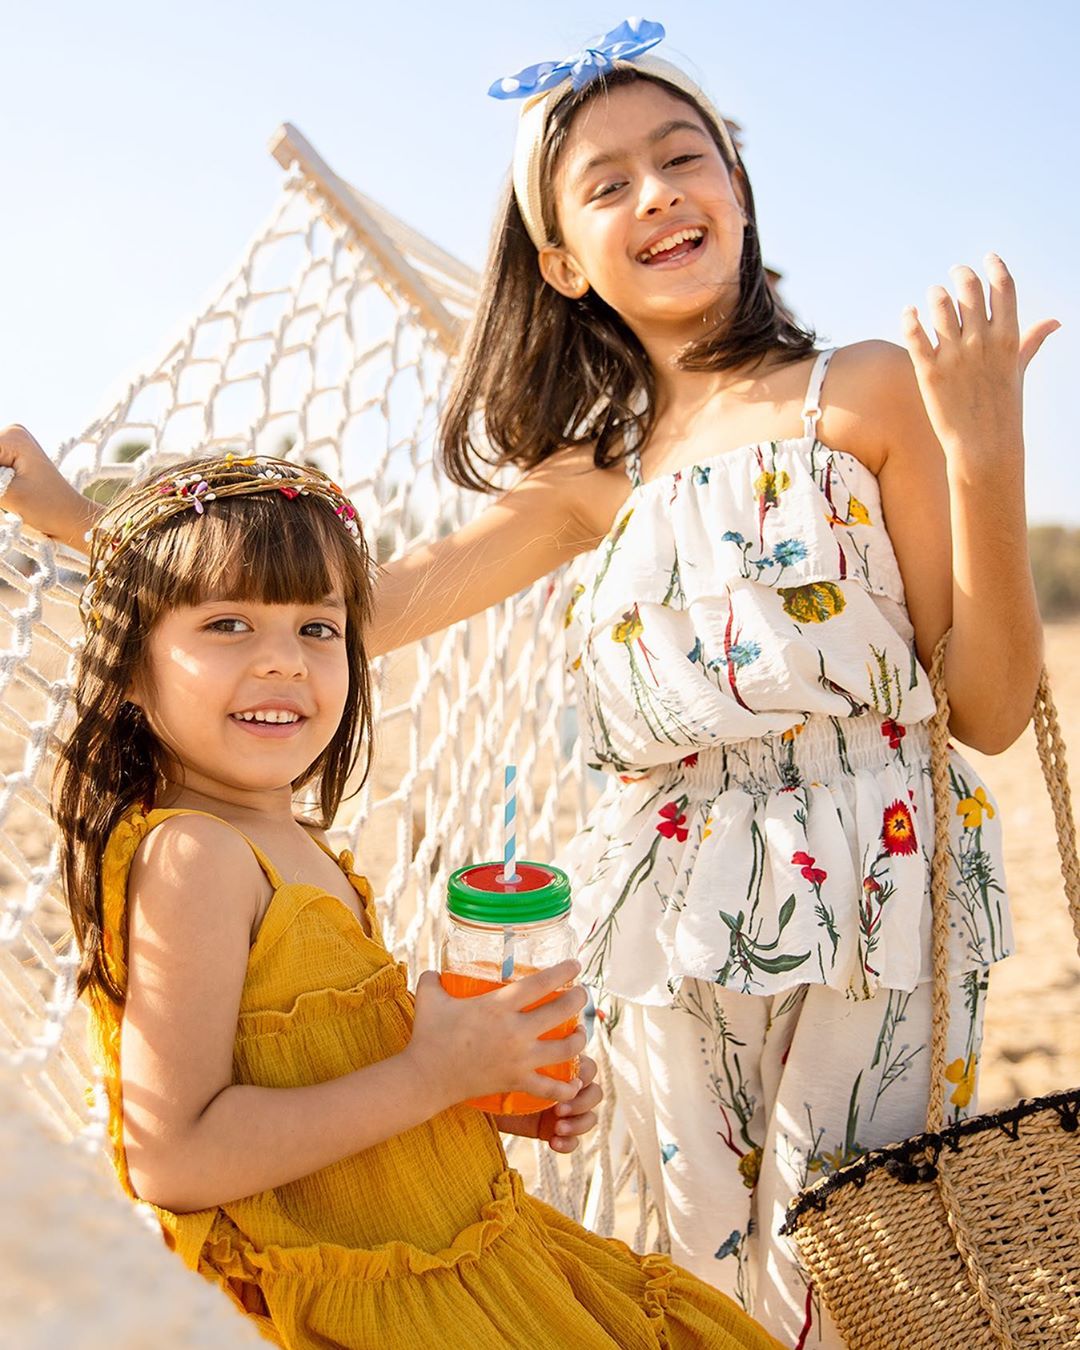 Hopscotch - #Throwback to our favourite summer memory! ☀️
Soaking in the summer sun on hammocks with fresh lemonade and a bestie!🤗💕
What is your little one’s favourite summer memory? 
We’d love to kno...